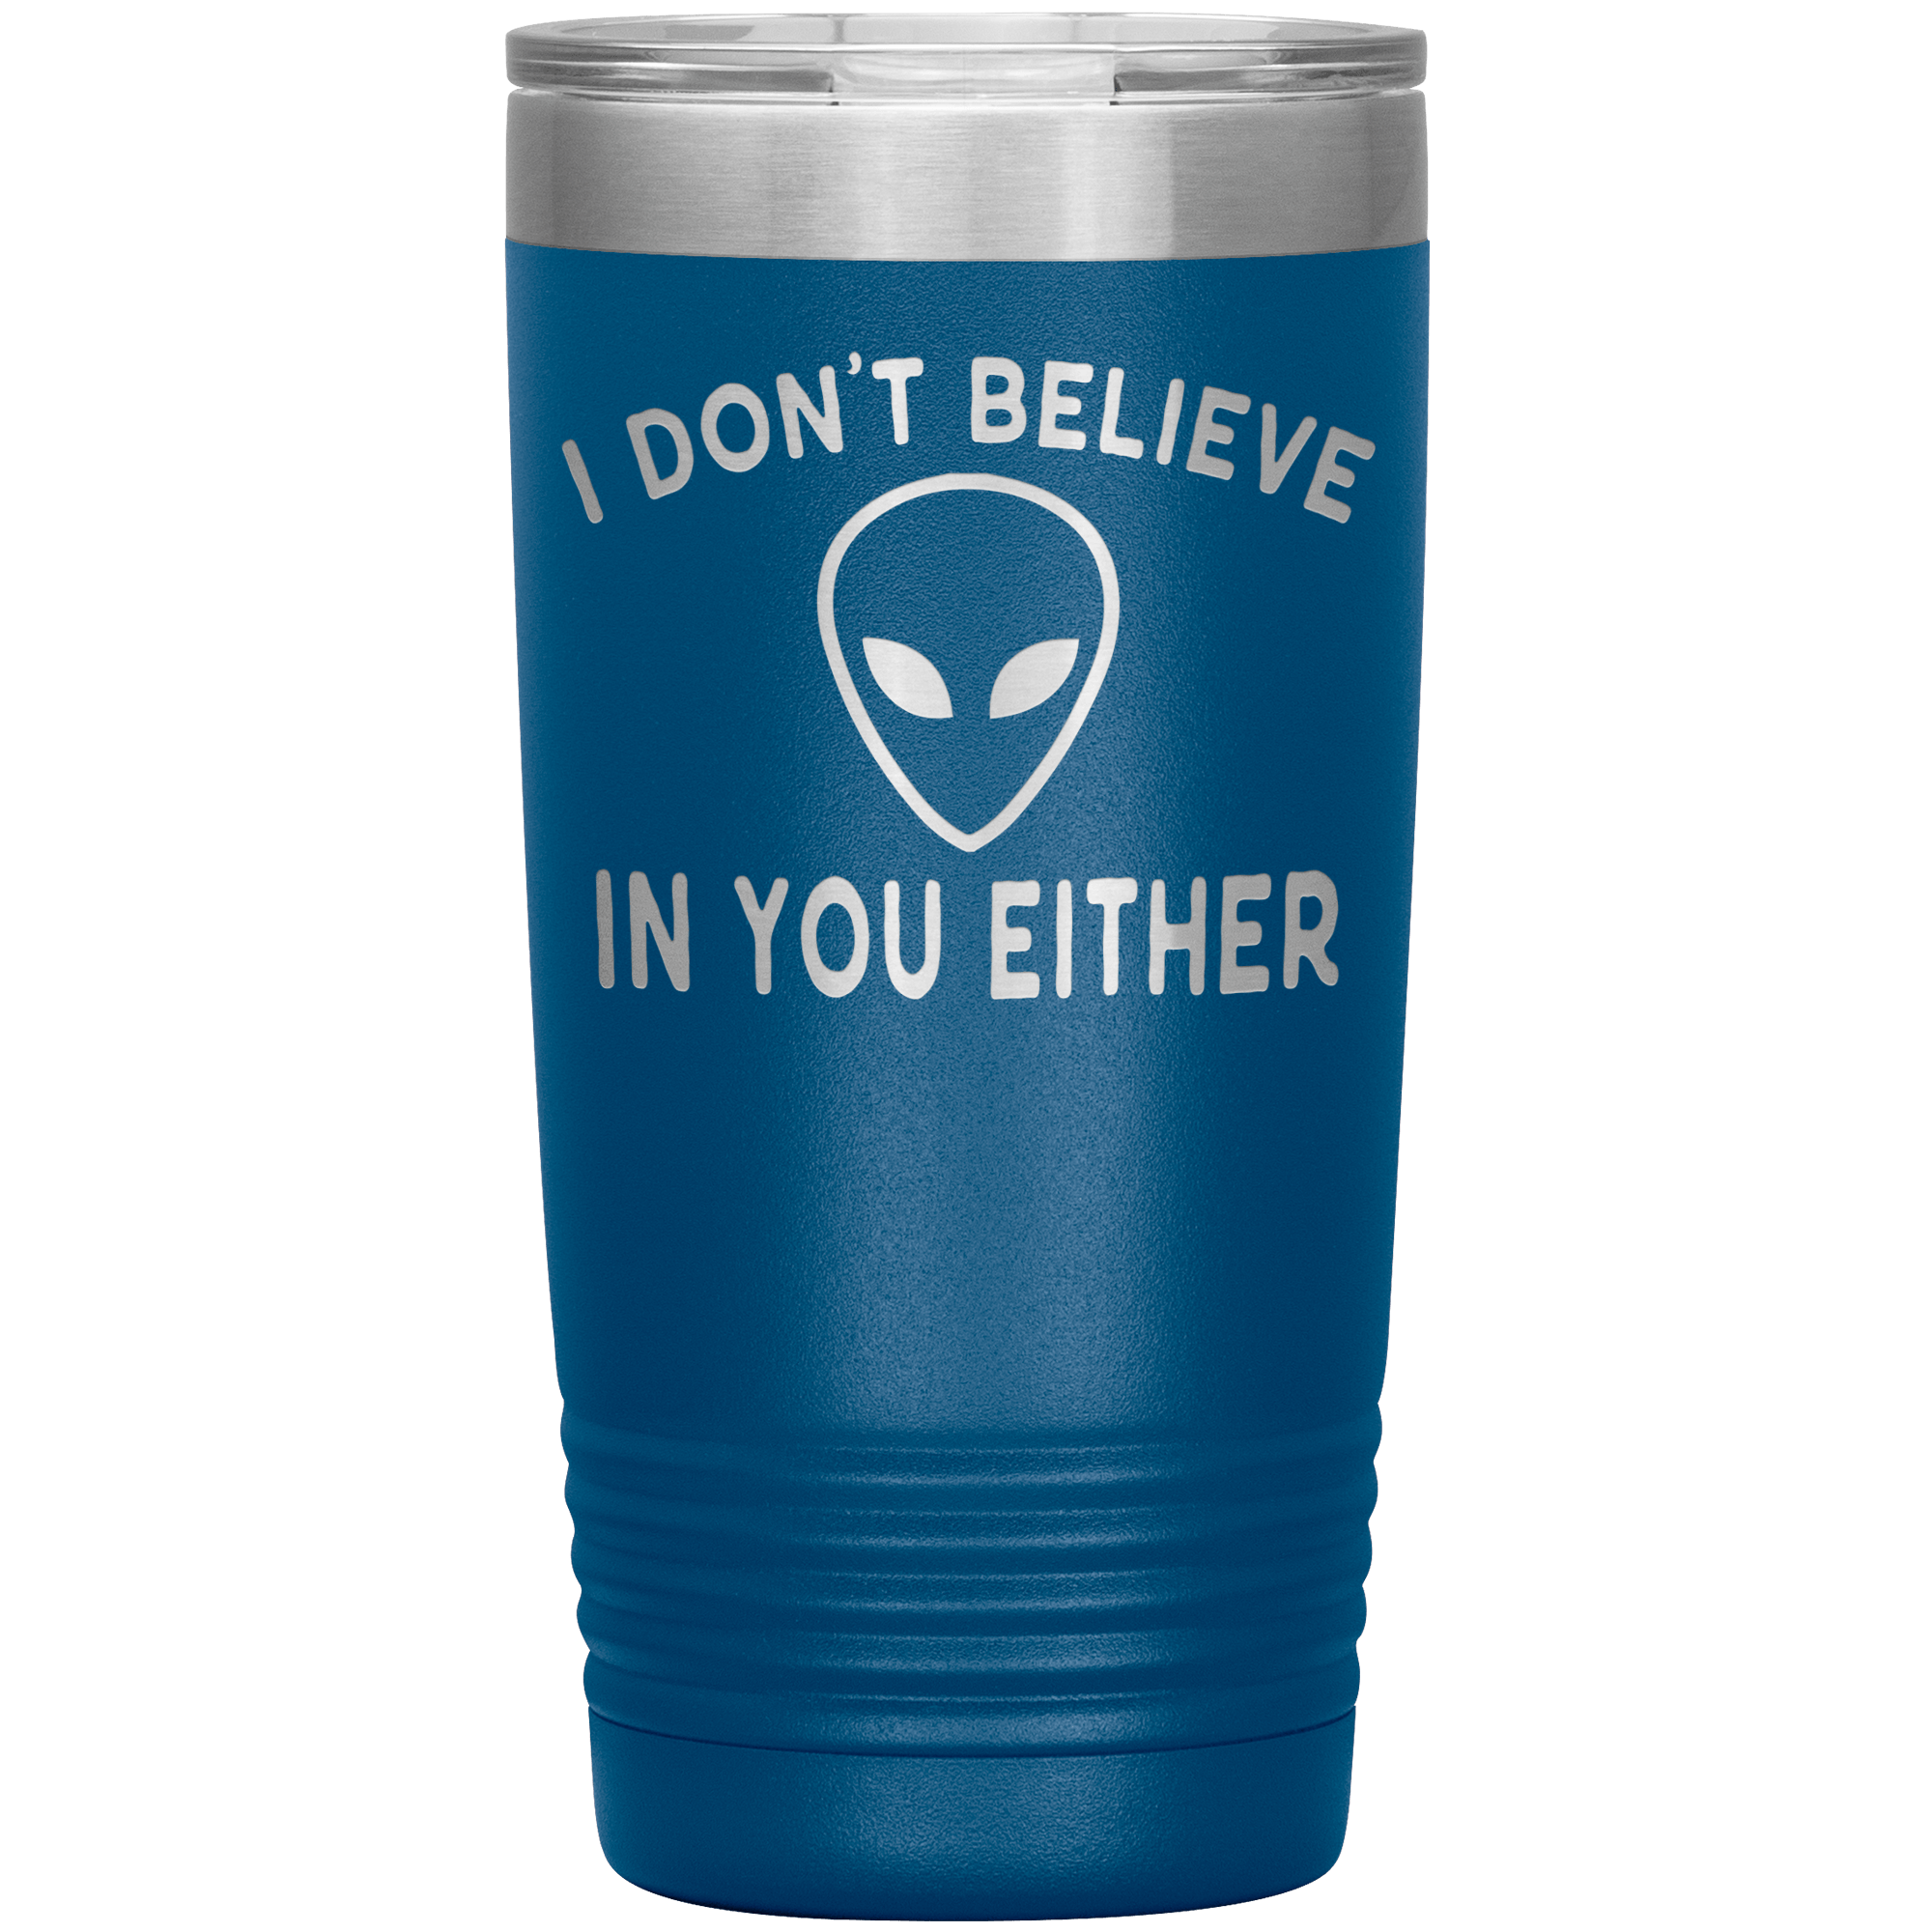 I DON'T BELIEVE IN YOU EITHER - TUMBLER